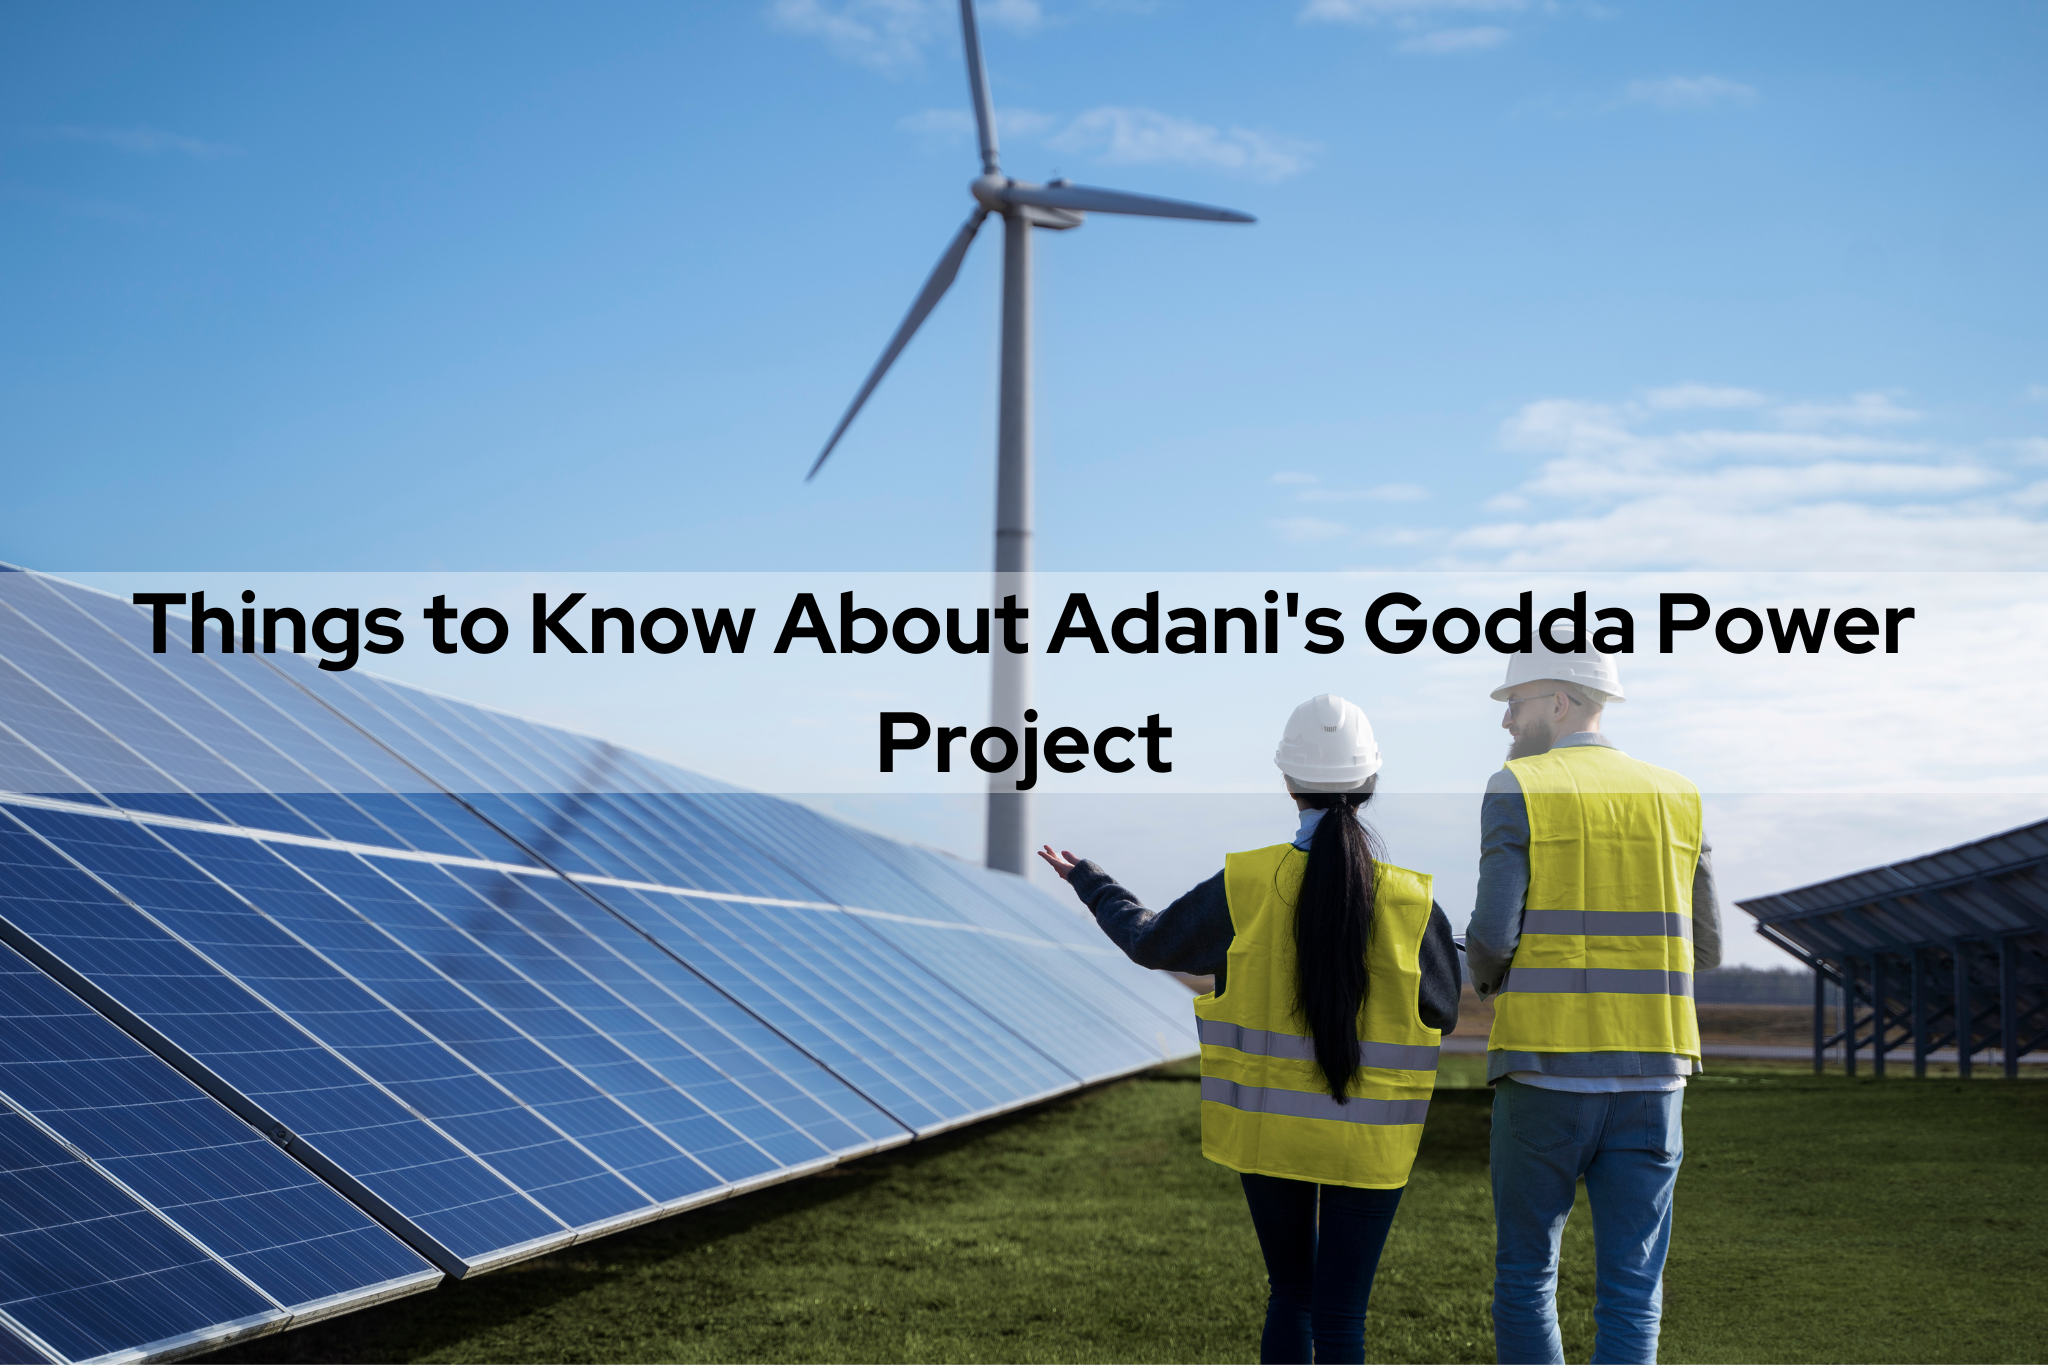 Things to Know About Adanis Godda Power Project